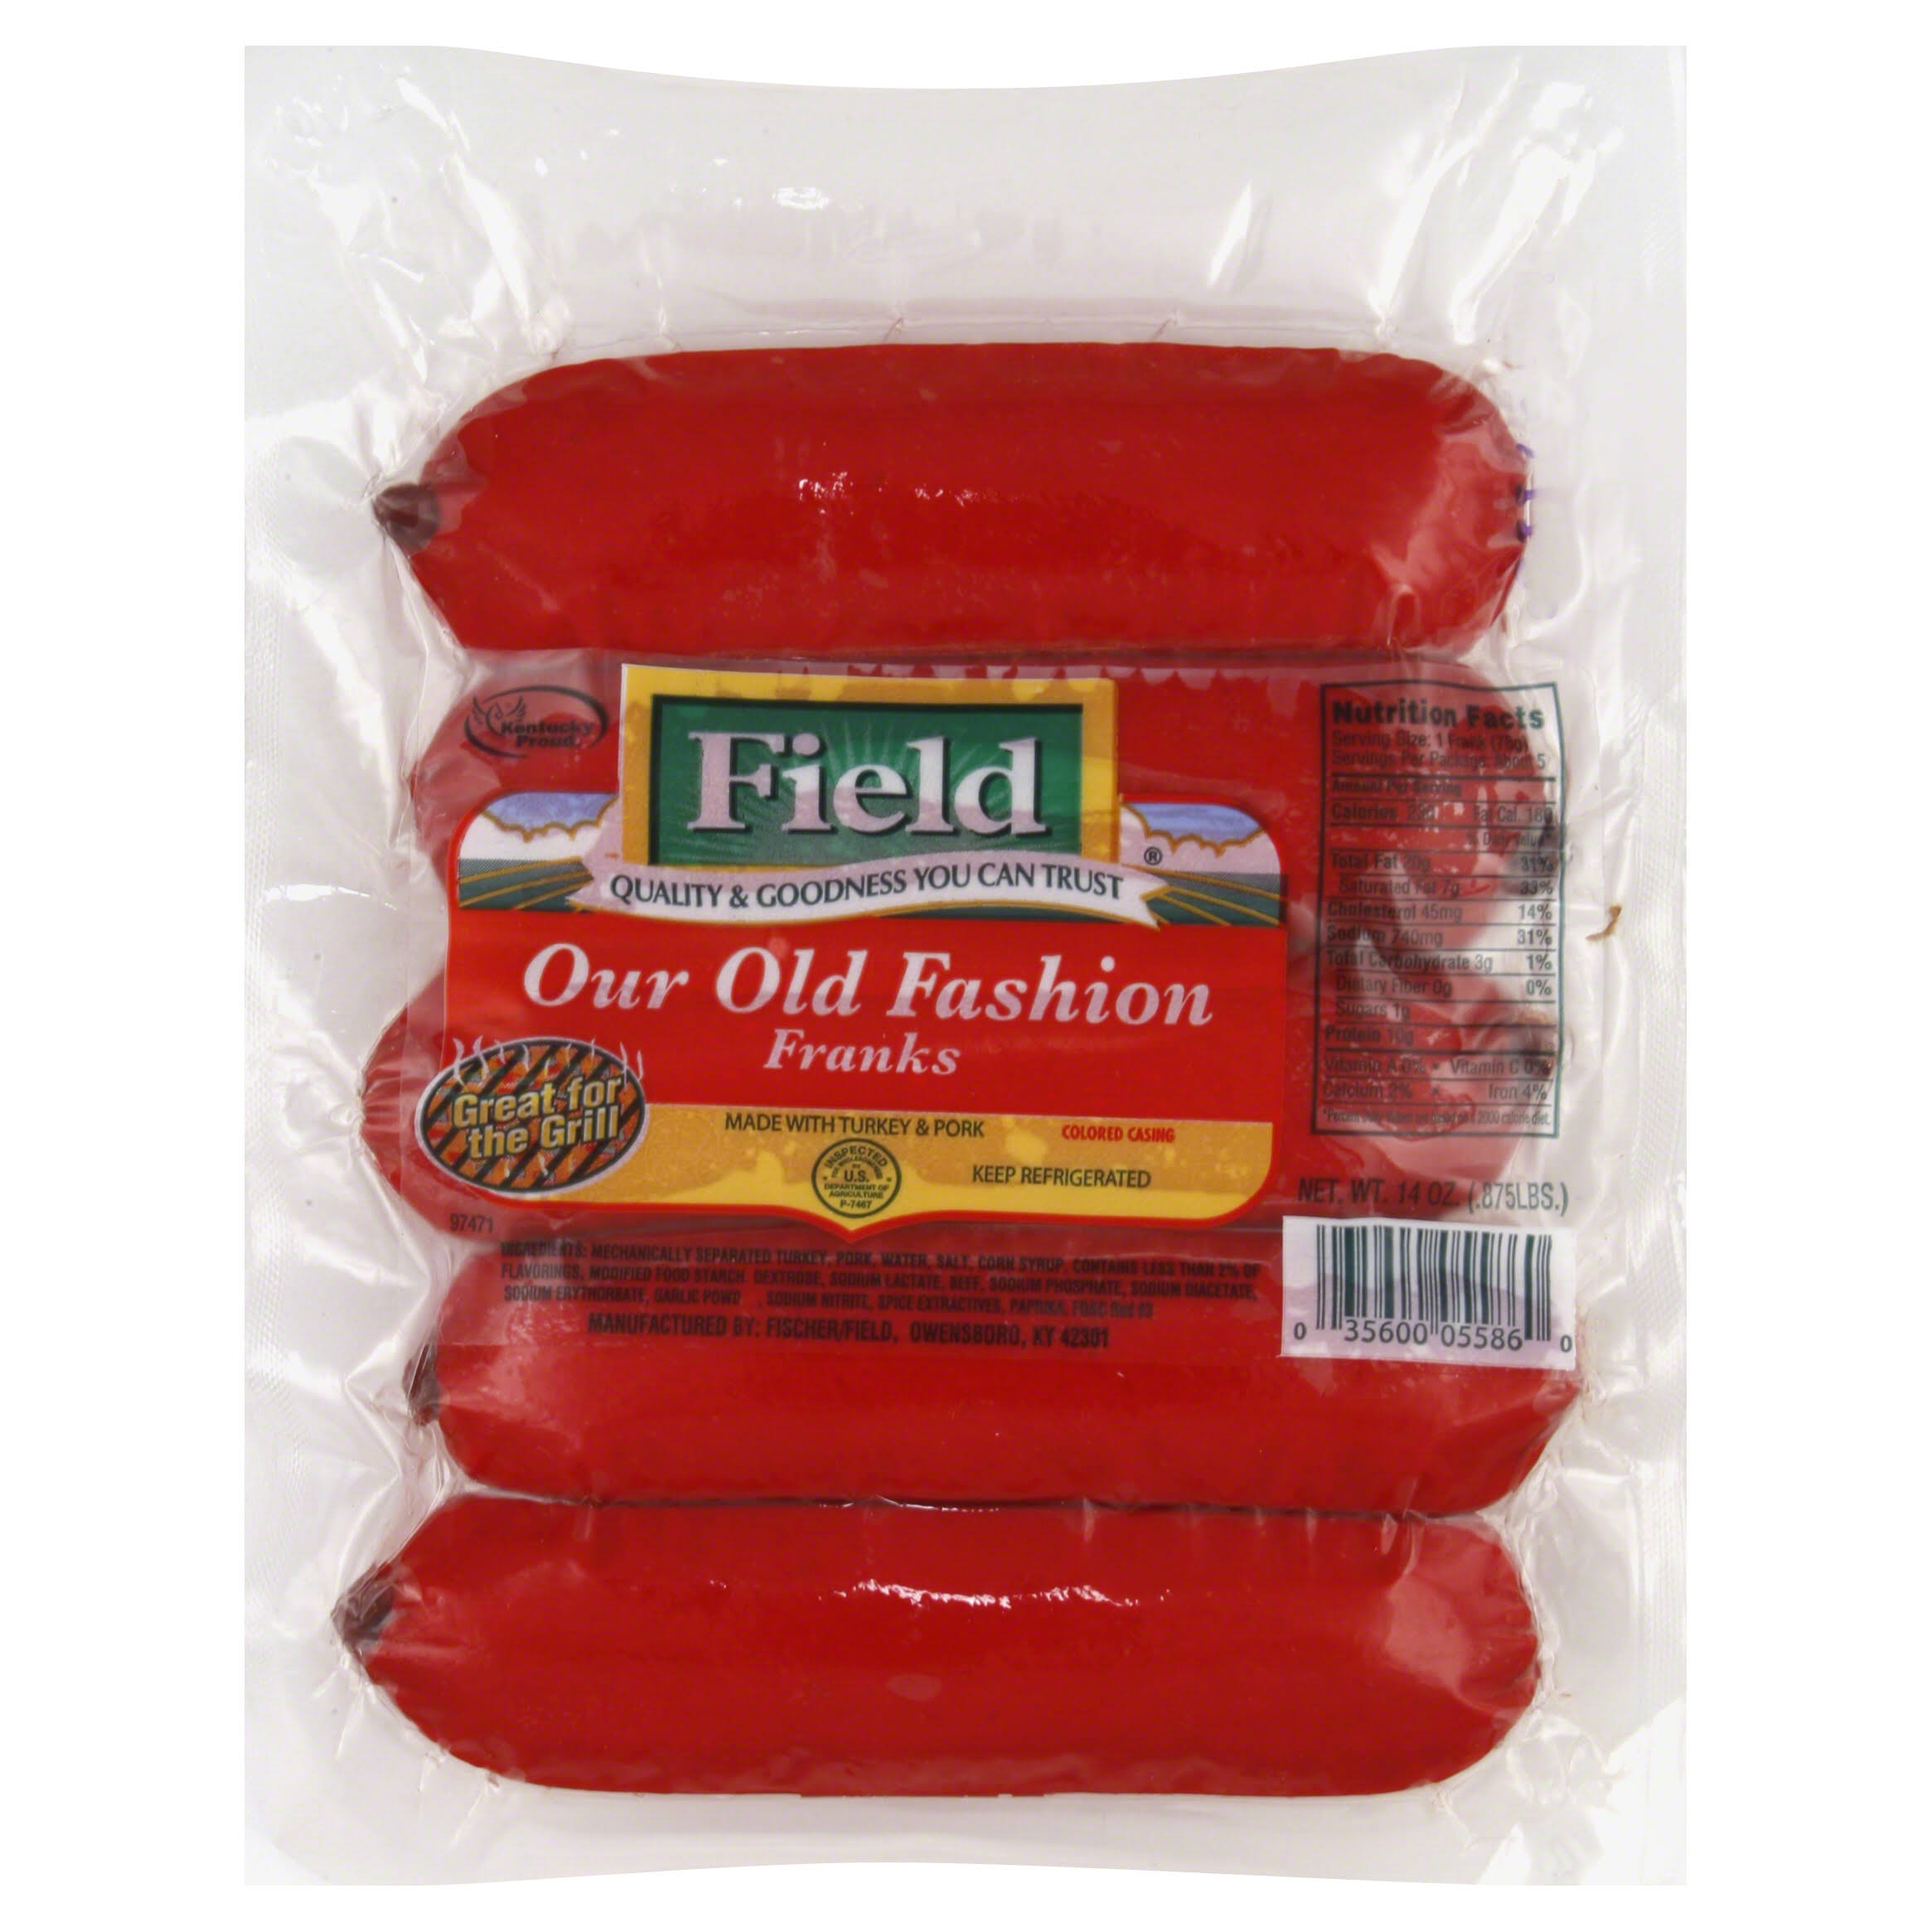 Field Franks, Our Old Fashion - 14 oz